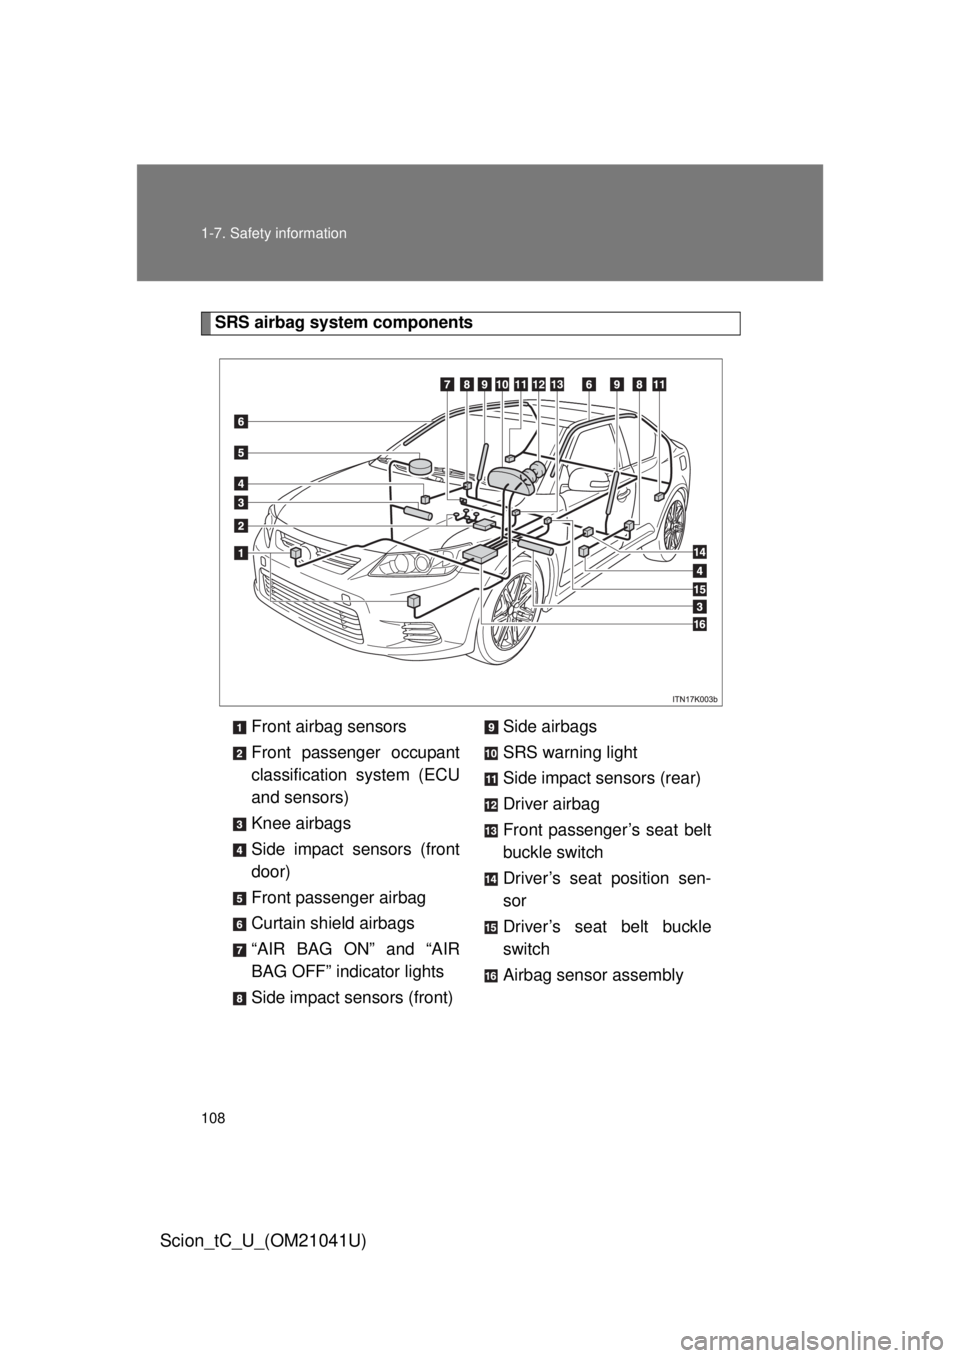 TOYOTA tC 2012  Owners Manual (in English) 108 1-7. Safety information
Scion_tC_U_(OM21041U)
SRS airbag system componentsFront airbag sensors
Front passenger occupant 
classification system (ECU 
and sensors)
Knee airbags
Side impact sensors (